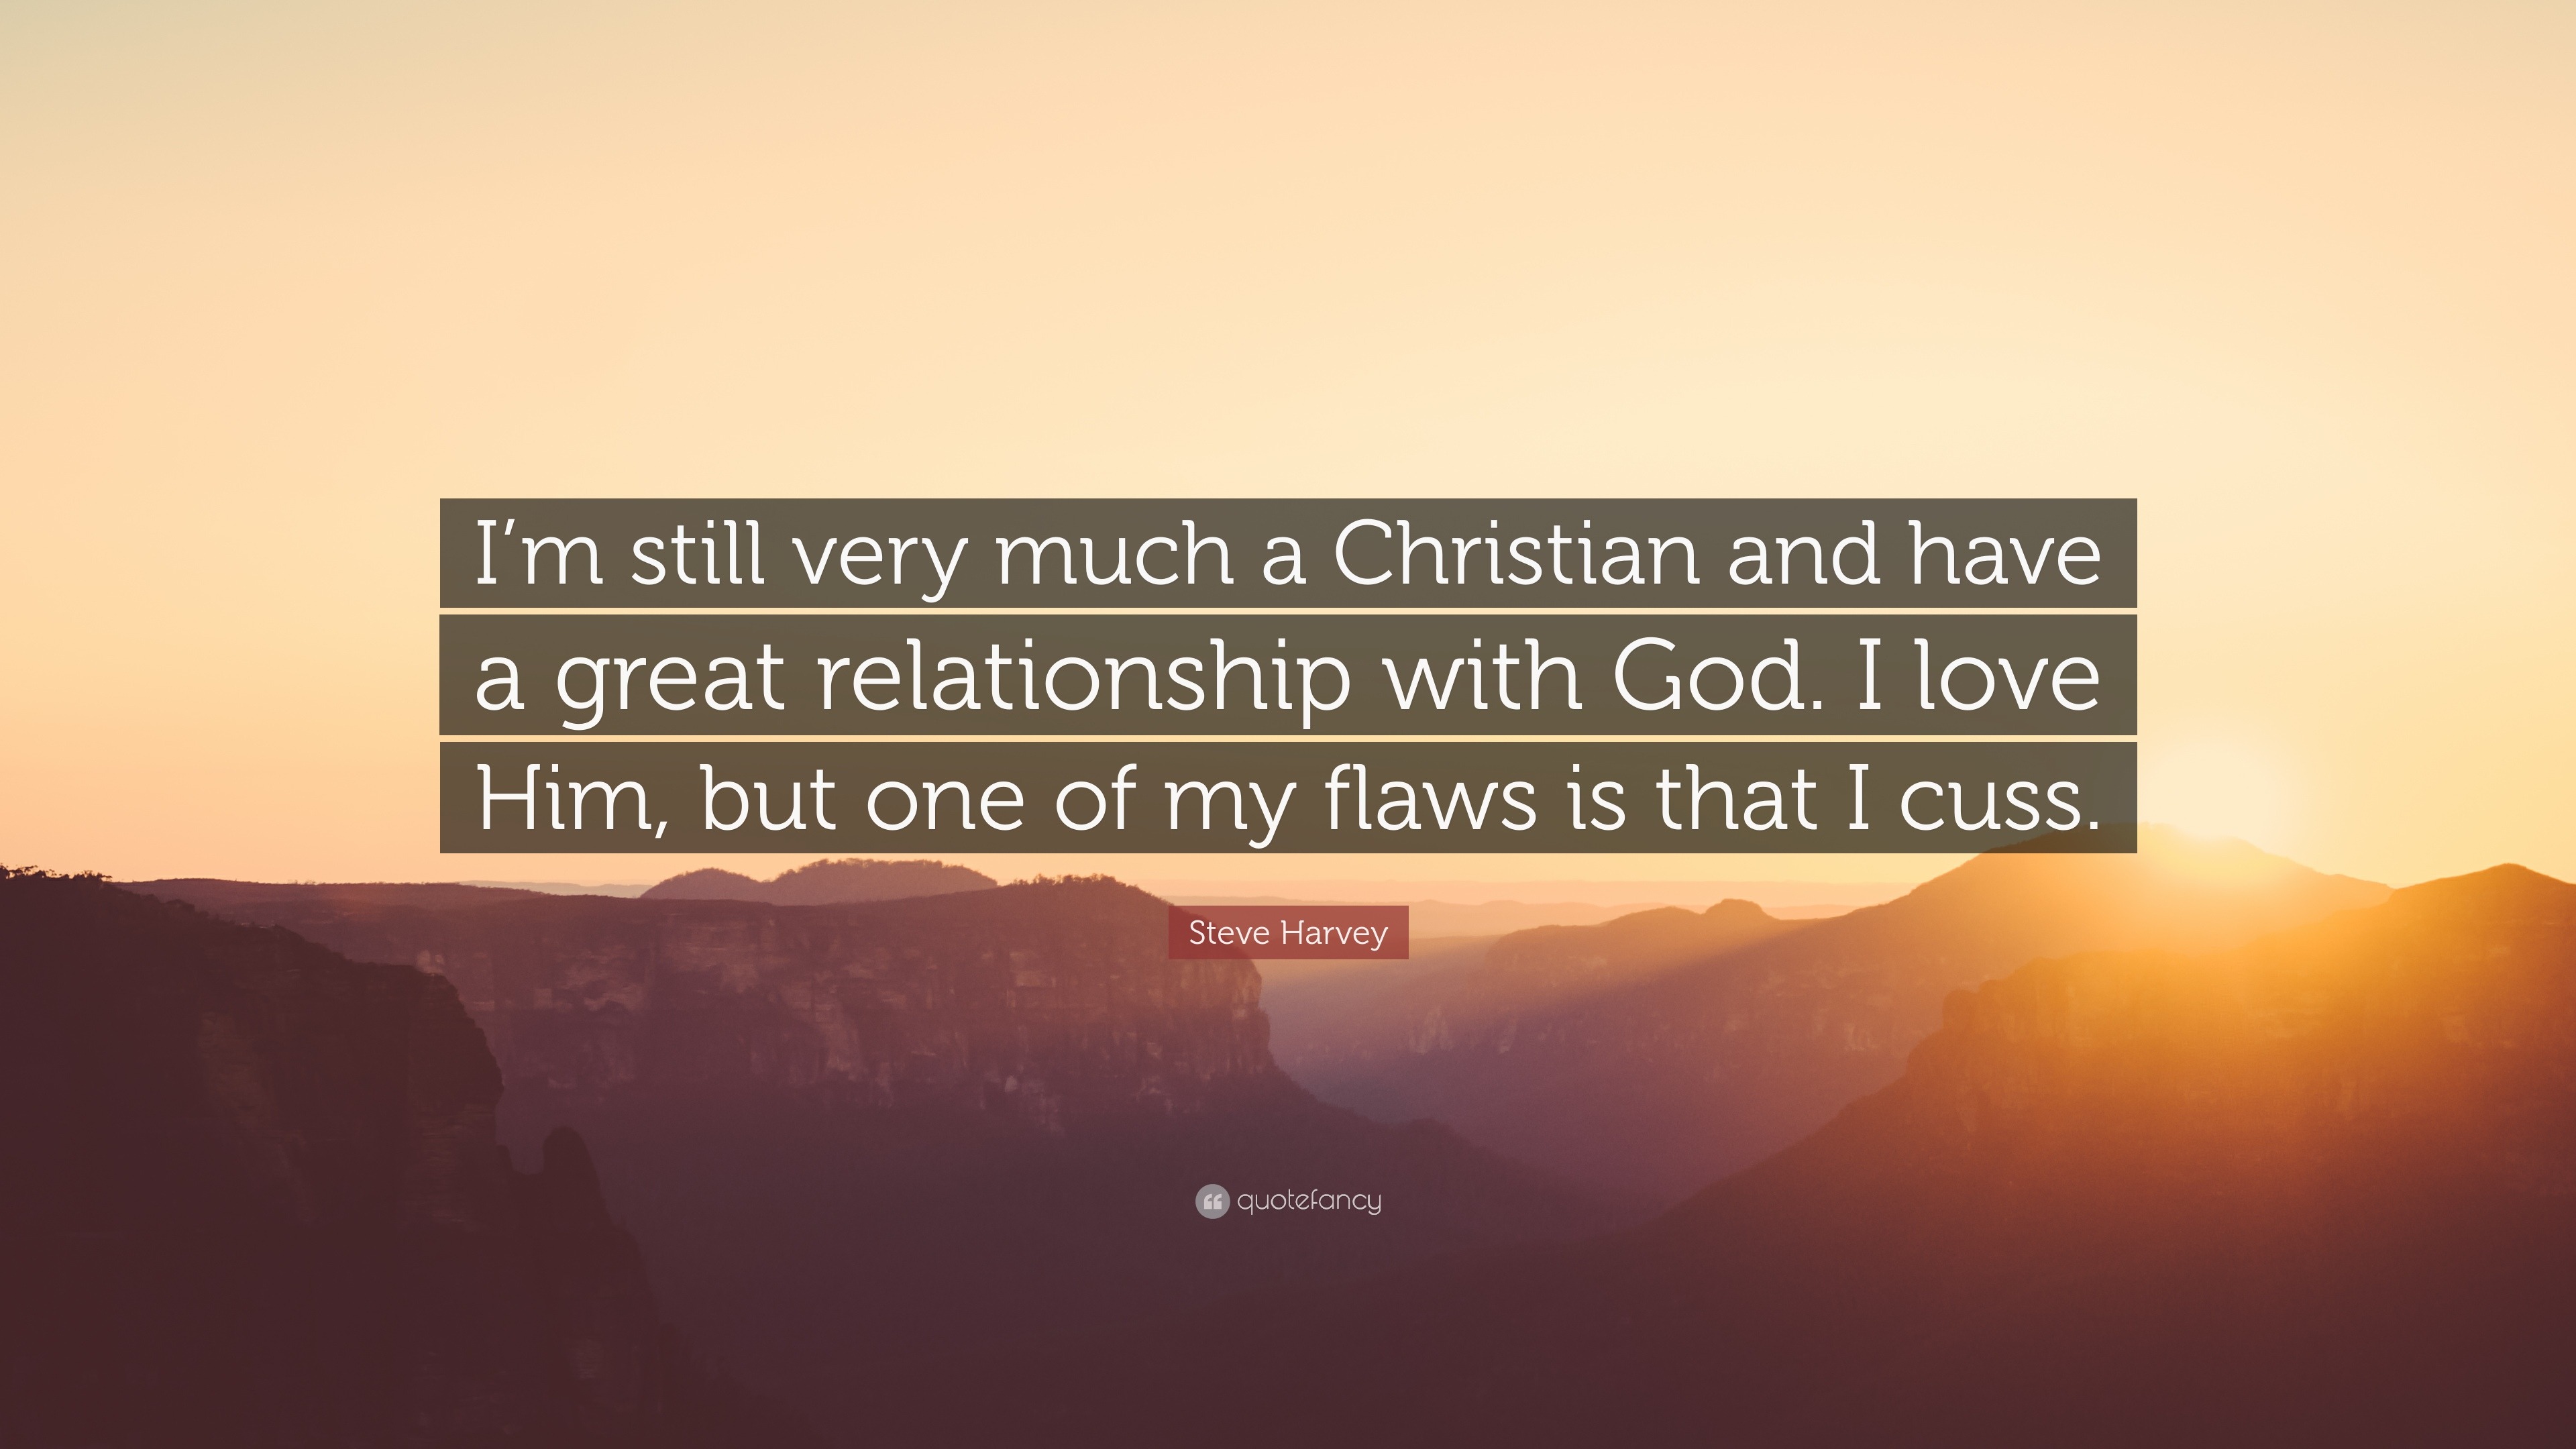 Steve Harvey Quote “I m still very much a Christian and have a